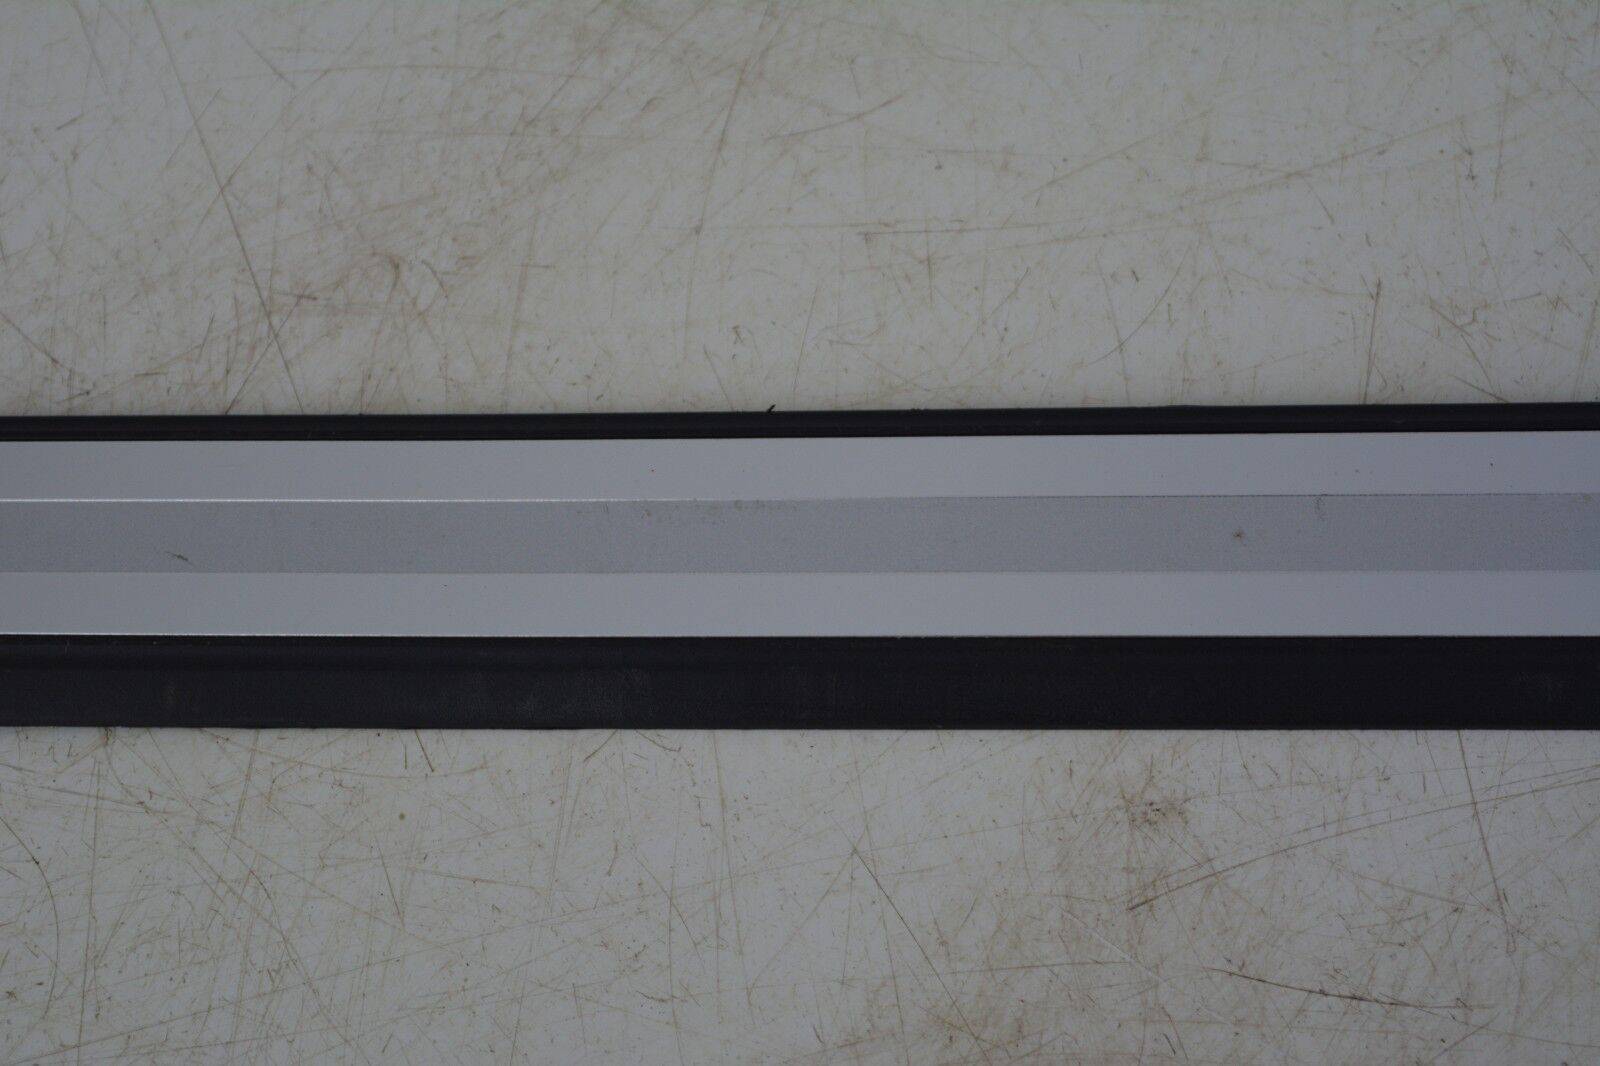 AUDI-A4-DOOR-SILL-ENTRY-TRIM-FRONT-LEFT-2015-2018-175367529874-4